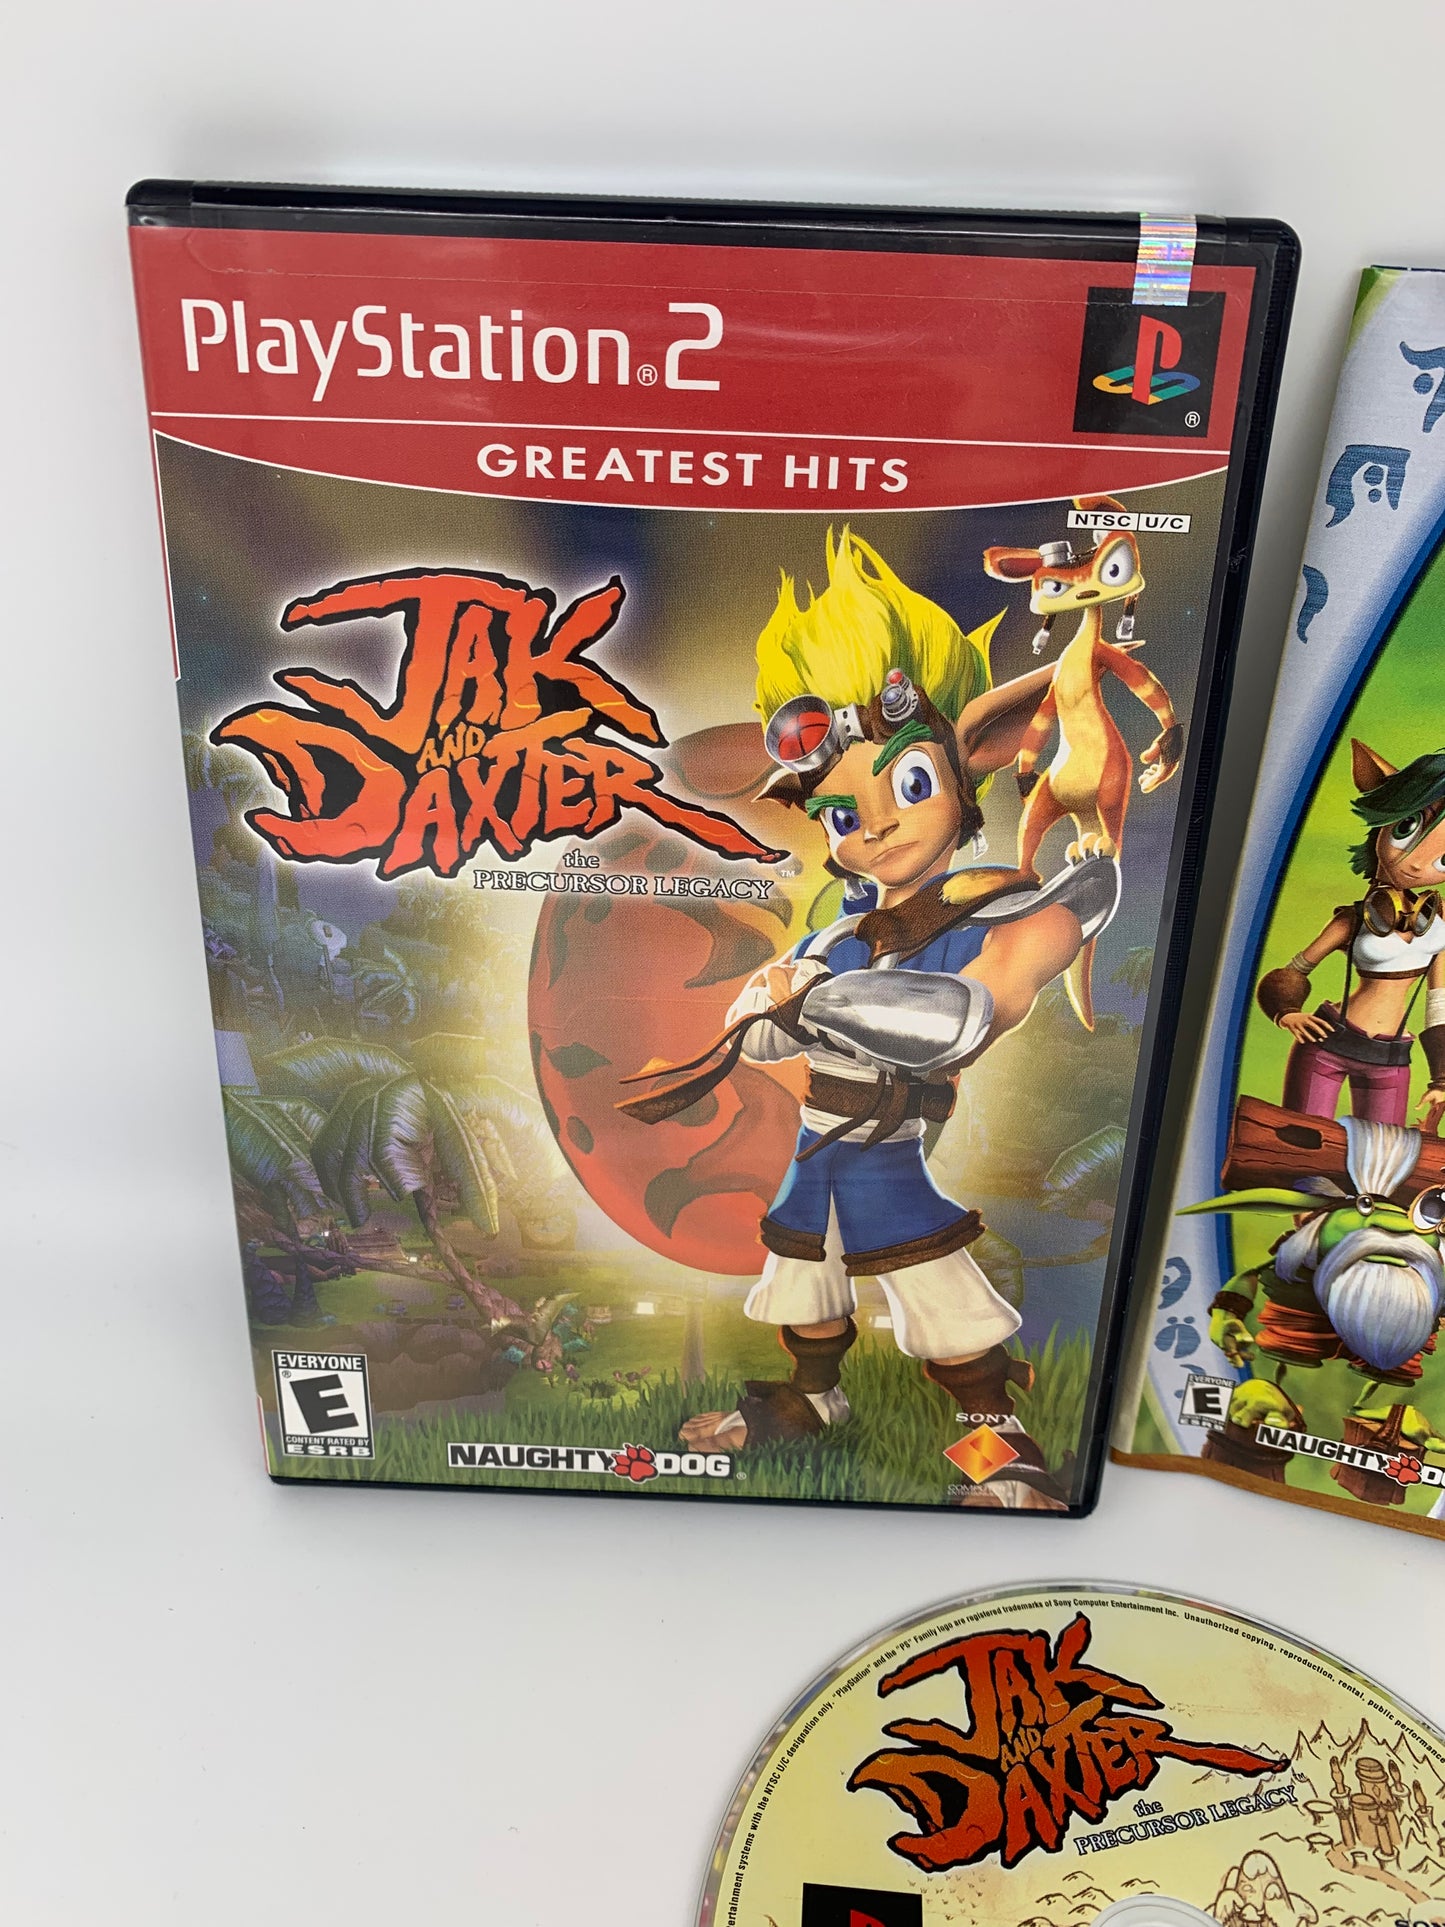 SONY PLAYSTATiON 2 [PS2] | JAK AND DAXTER THE PRECURSOR LEGACY | GREATEST HiTS